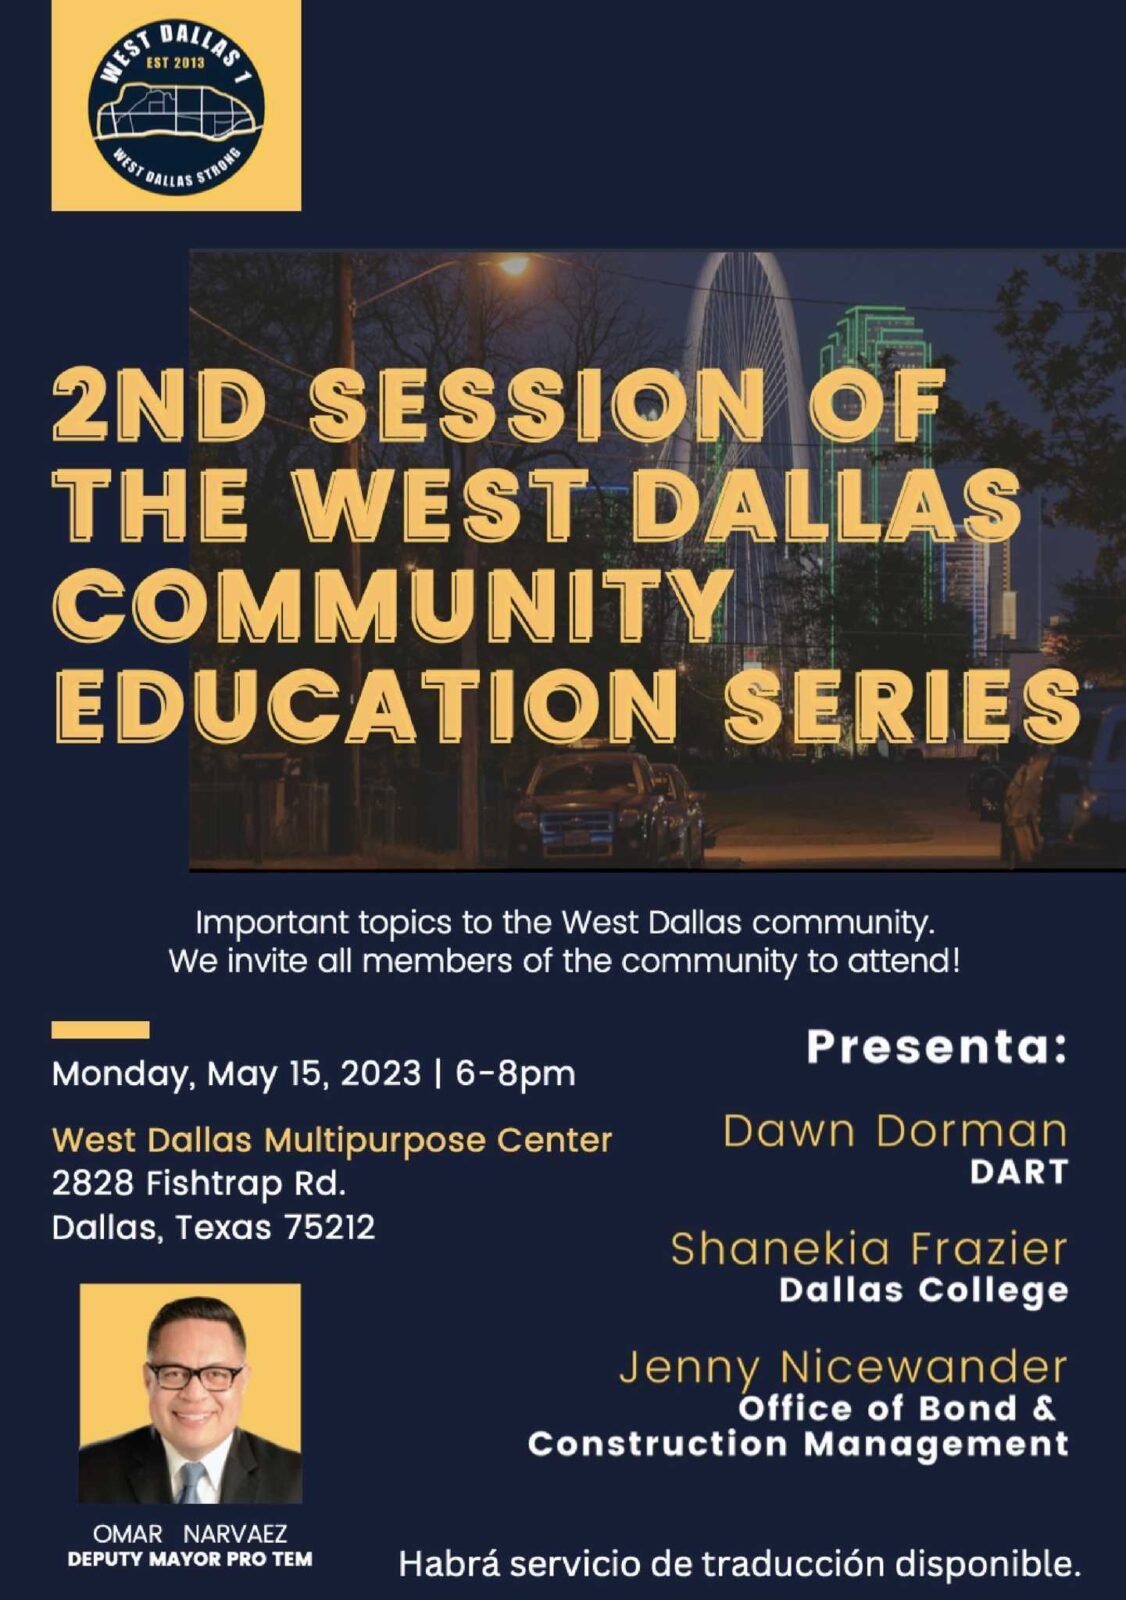 Poster reads: "2nd session of the West Dallas Community Education Series | Important topics to the West Dallas community. We invite all members of the community to attend! | Monday, May 15, 2023 6-8 pm at West Dallas Multipurpose Center | 2828 Fishtrap Rd. Dallas, TX 75212